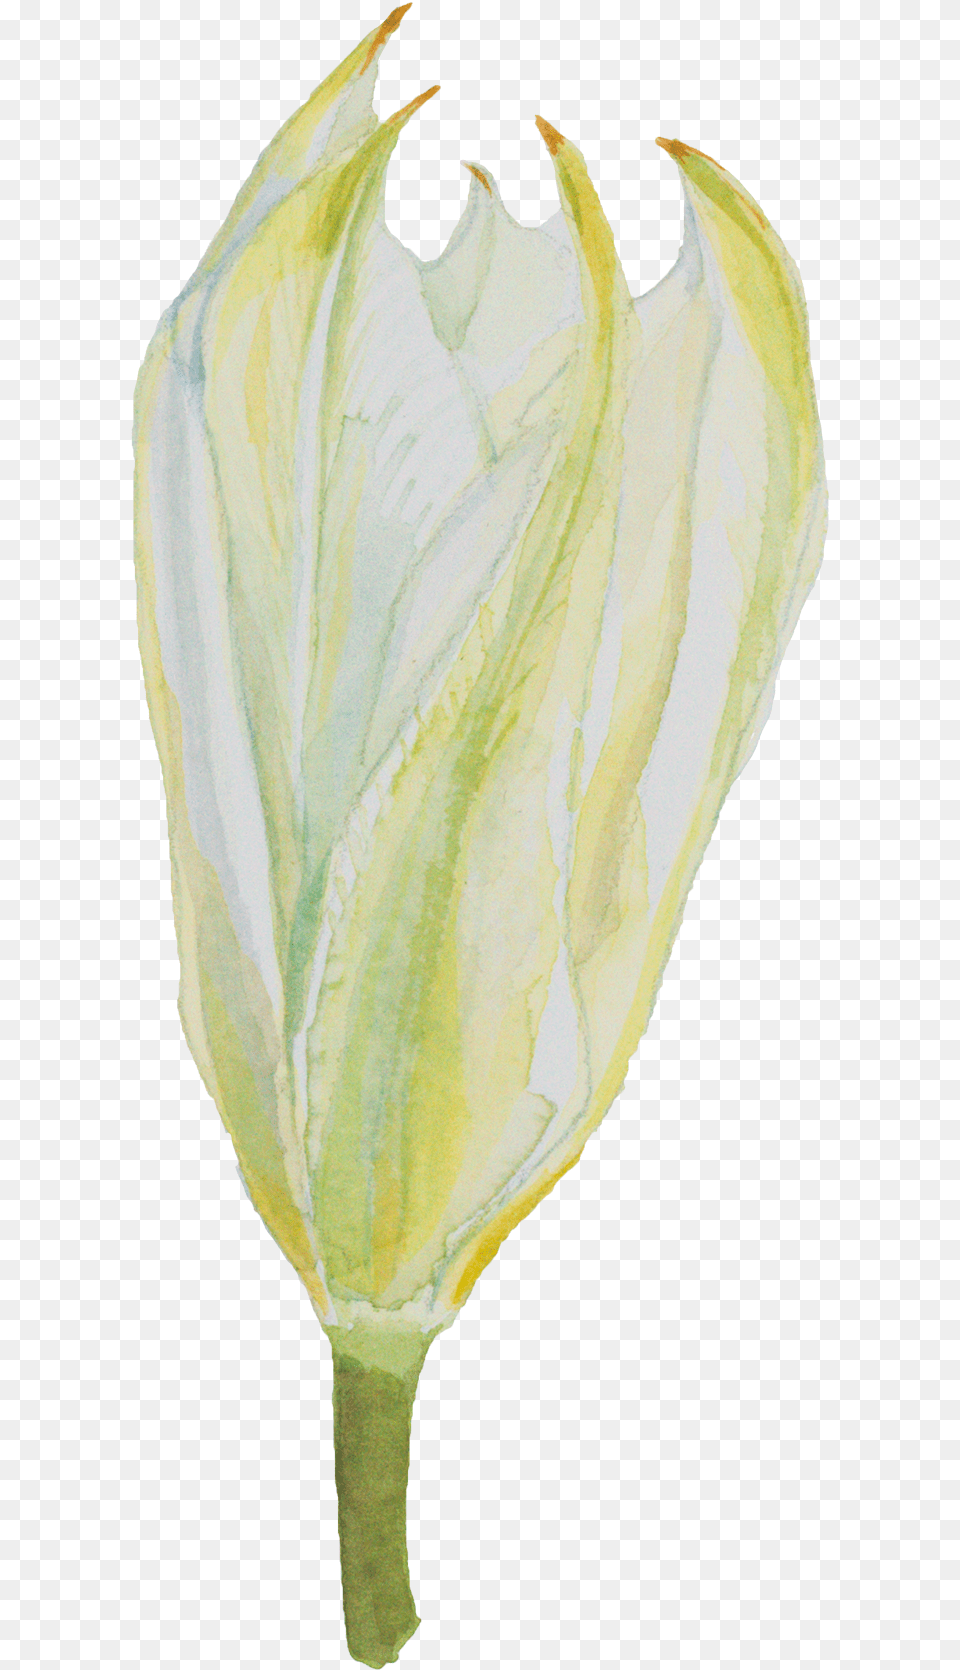 Tulip Hand Painted Watercolor Decorative Transparent Watercolor Painting, Bud, Flower, Leaf, Petal Free Png